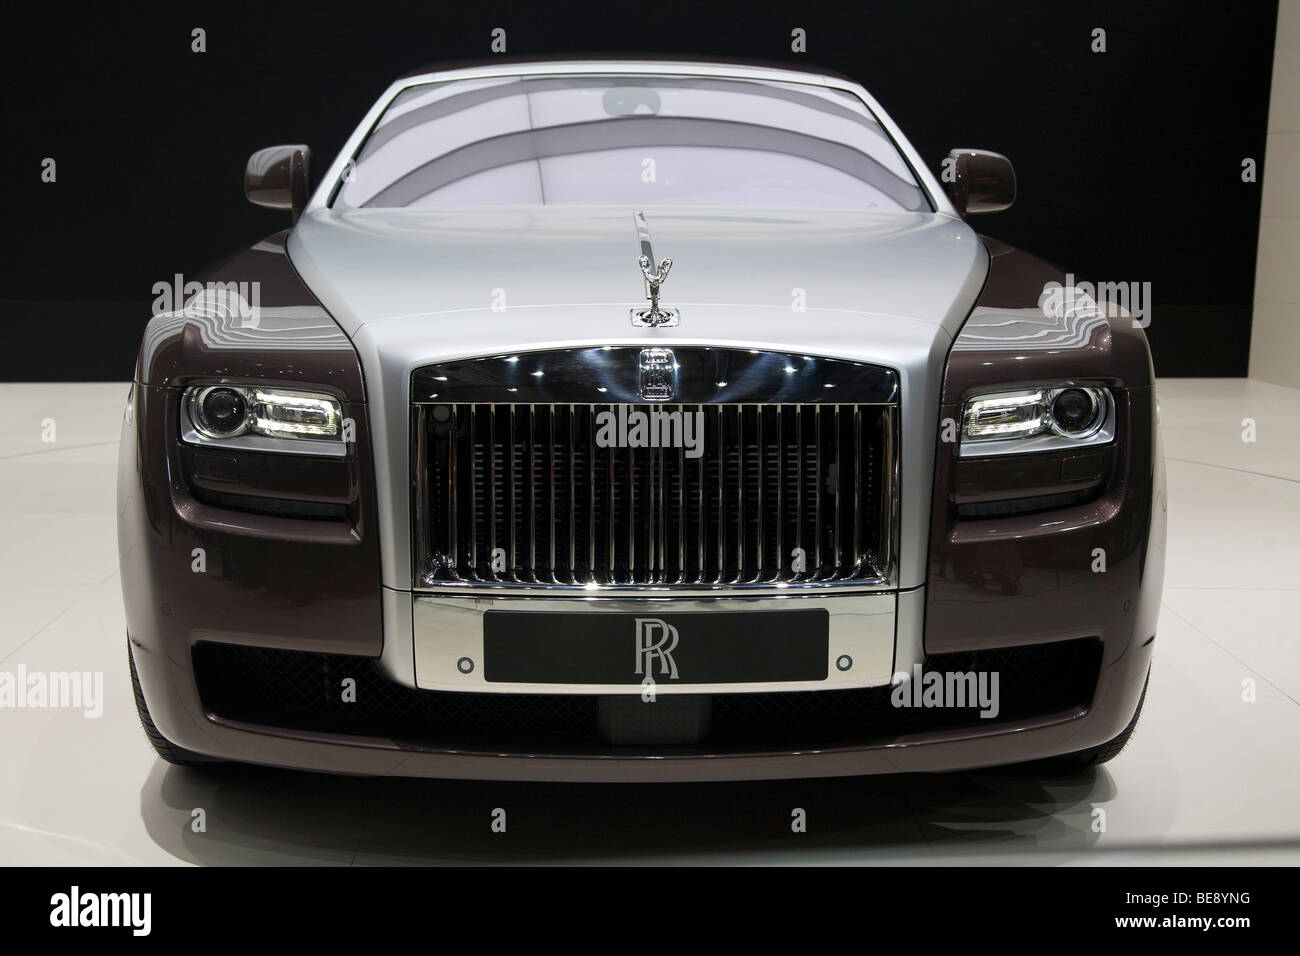 Rolls Royce Ghost premier at a European motor show Stock Photo